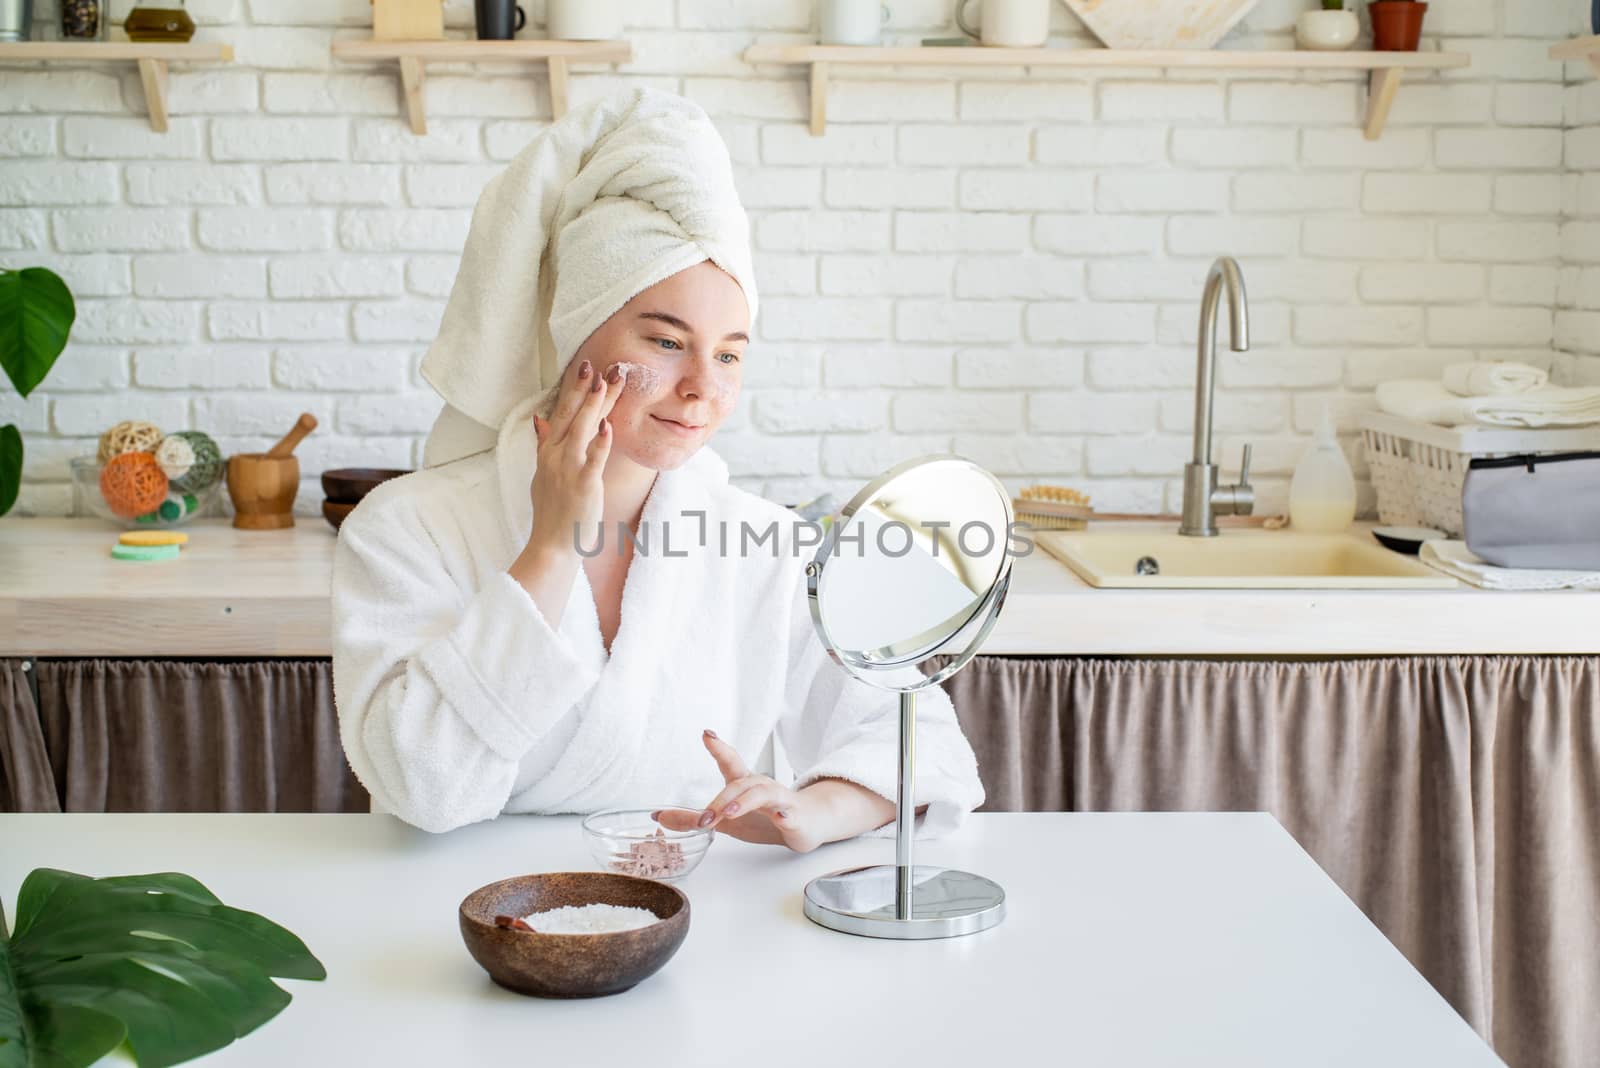 Spa and wellness. Natural cosmetics. Self care. Happy young woman applying face scrub on her face in her home kitchen looking at the mirror